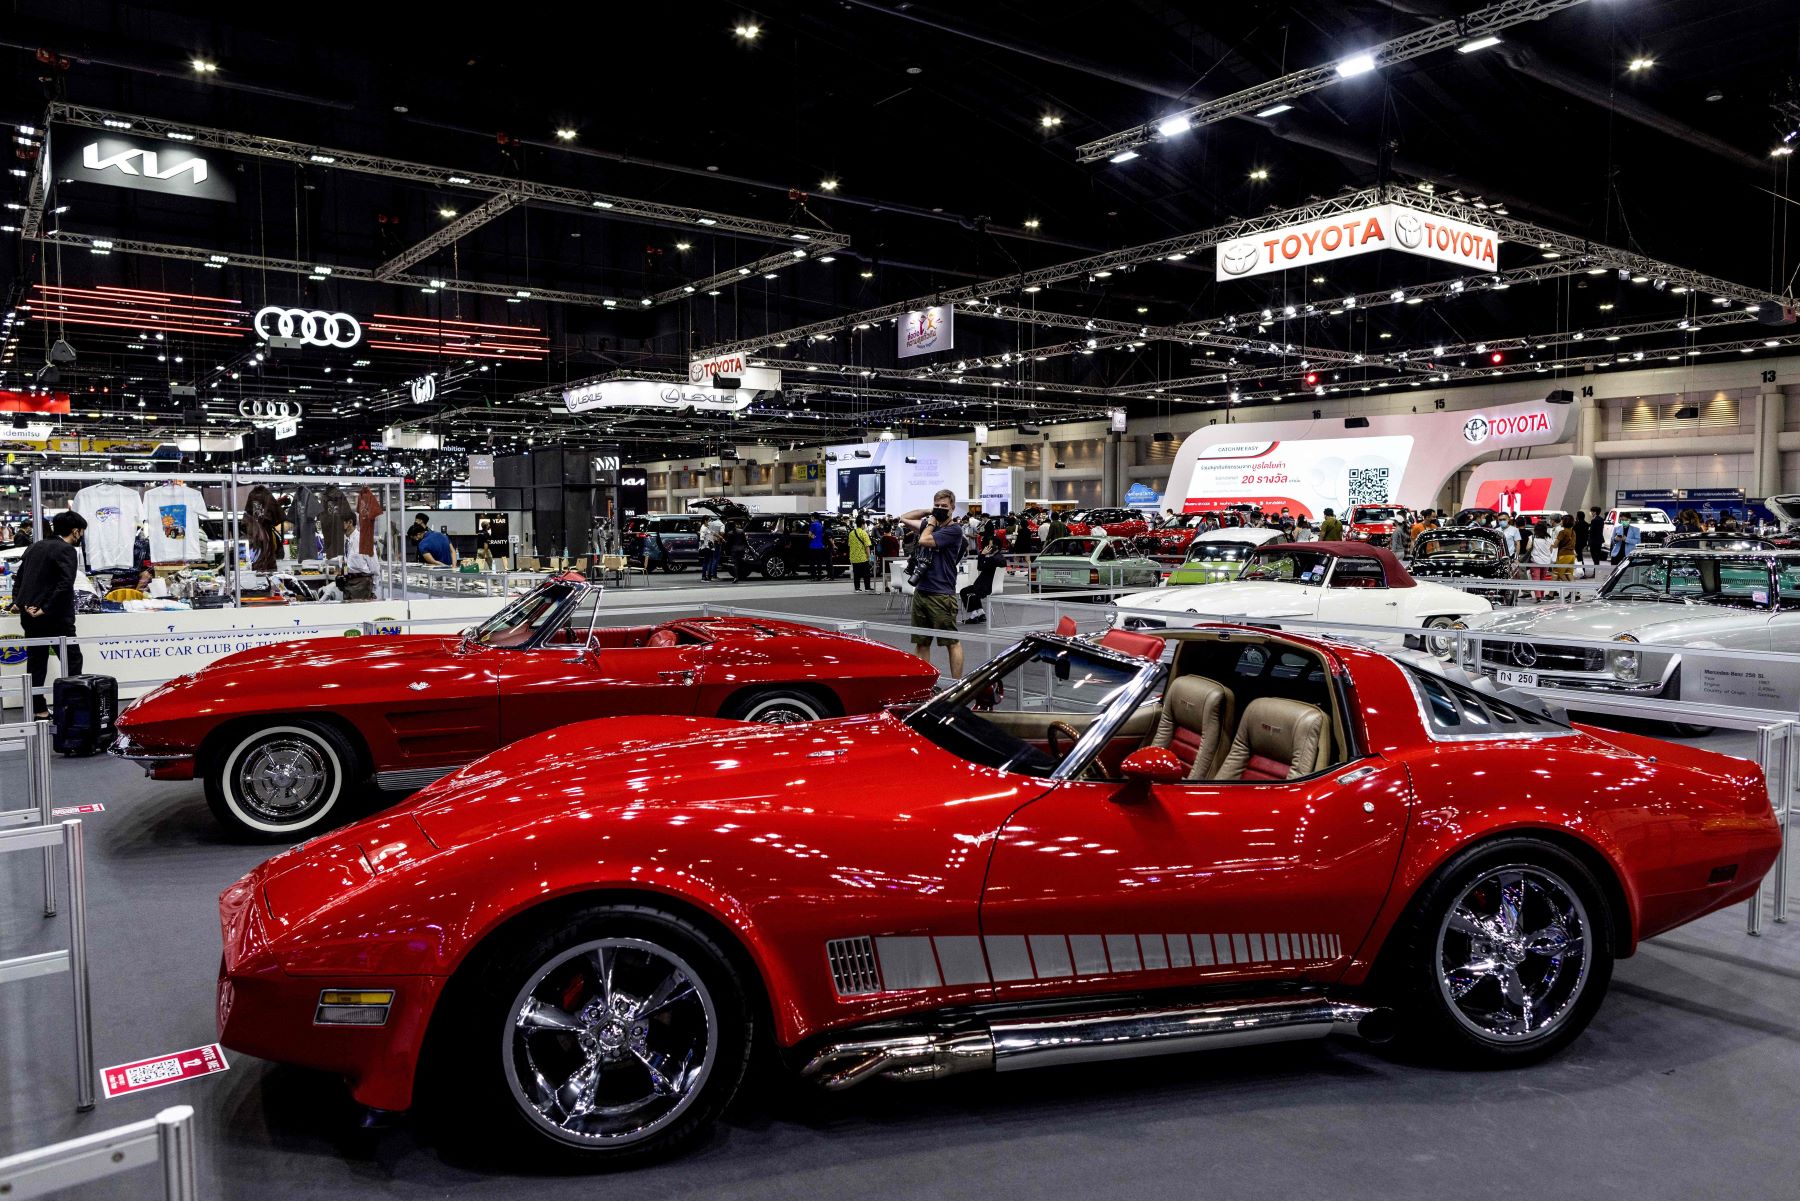 A display of vintage Chevy Corvette models at the 2021 Thailand International Motor Expo in Bangkok